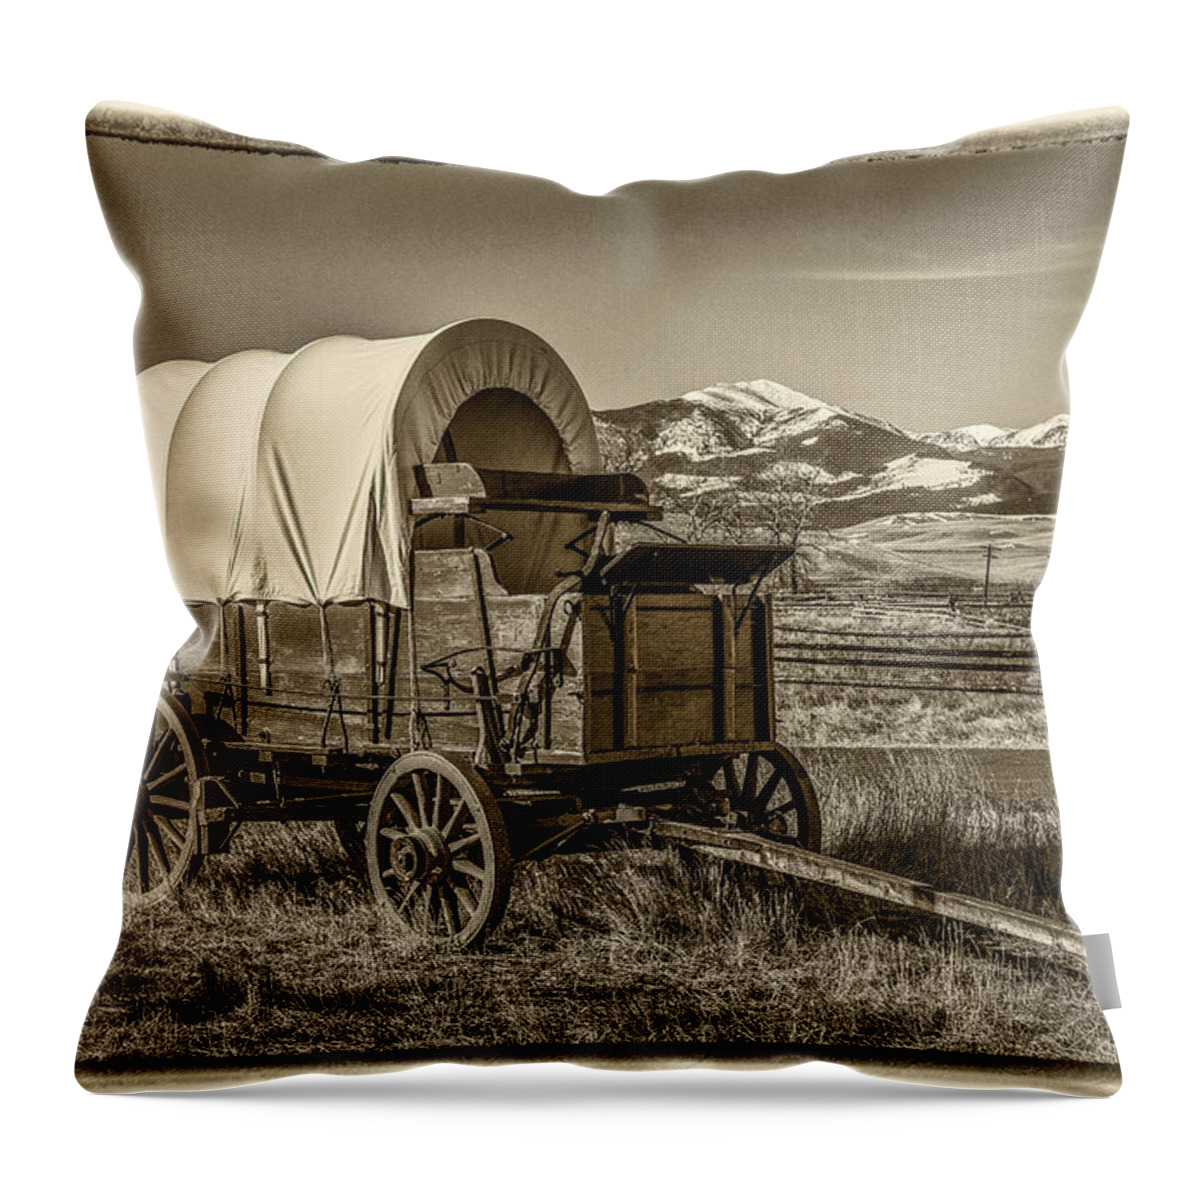 Covered Wagon Throw Pillow featuring the photograph Covered Wagon by Paul Freidlund